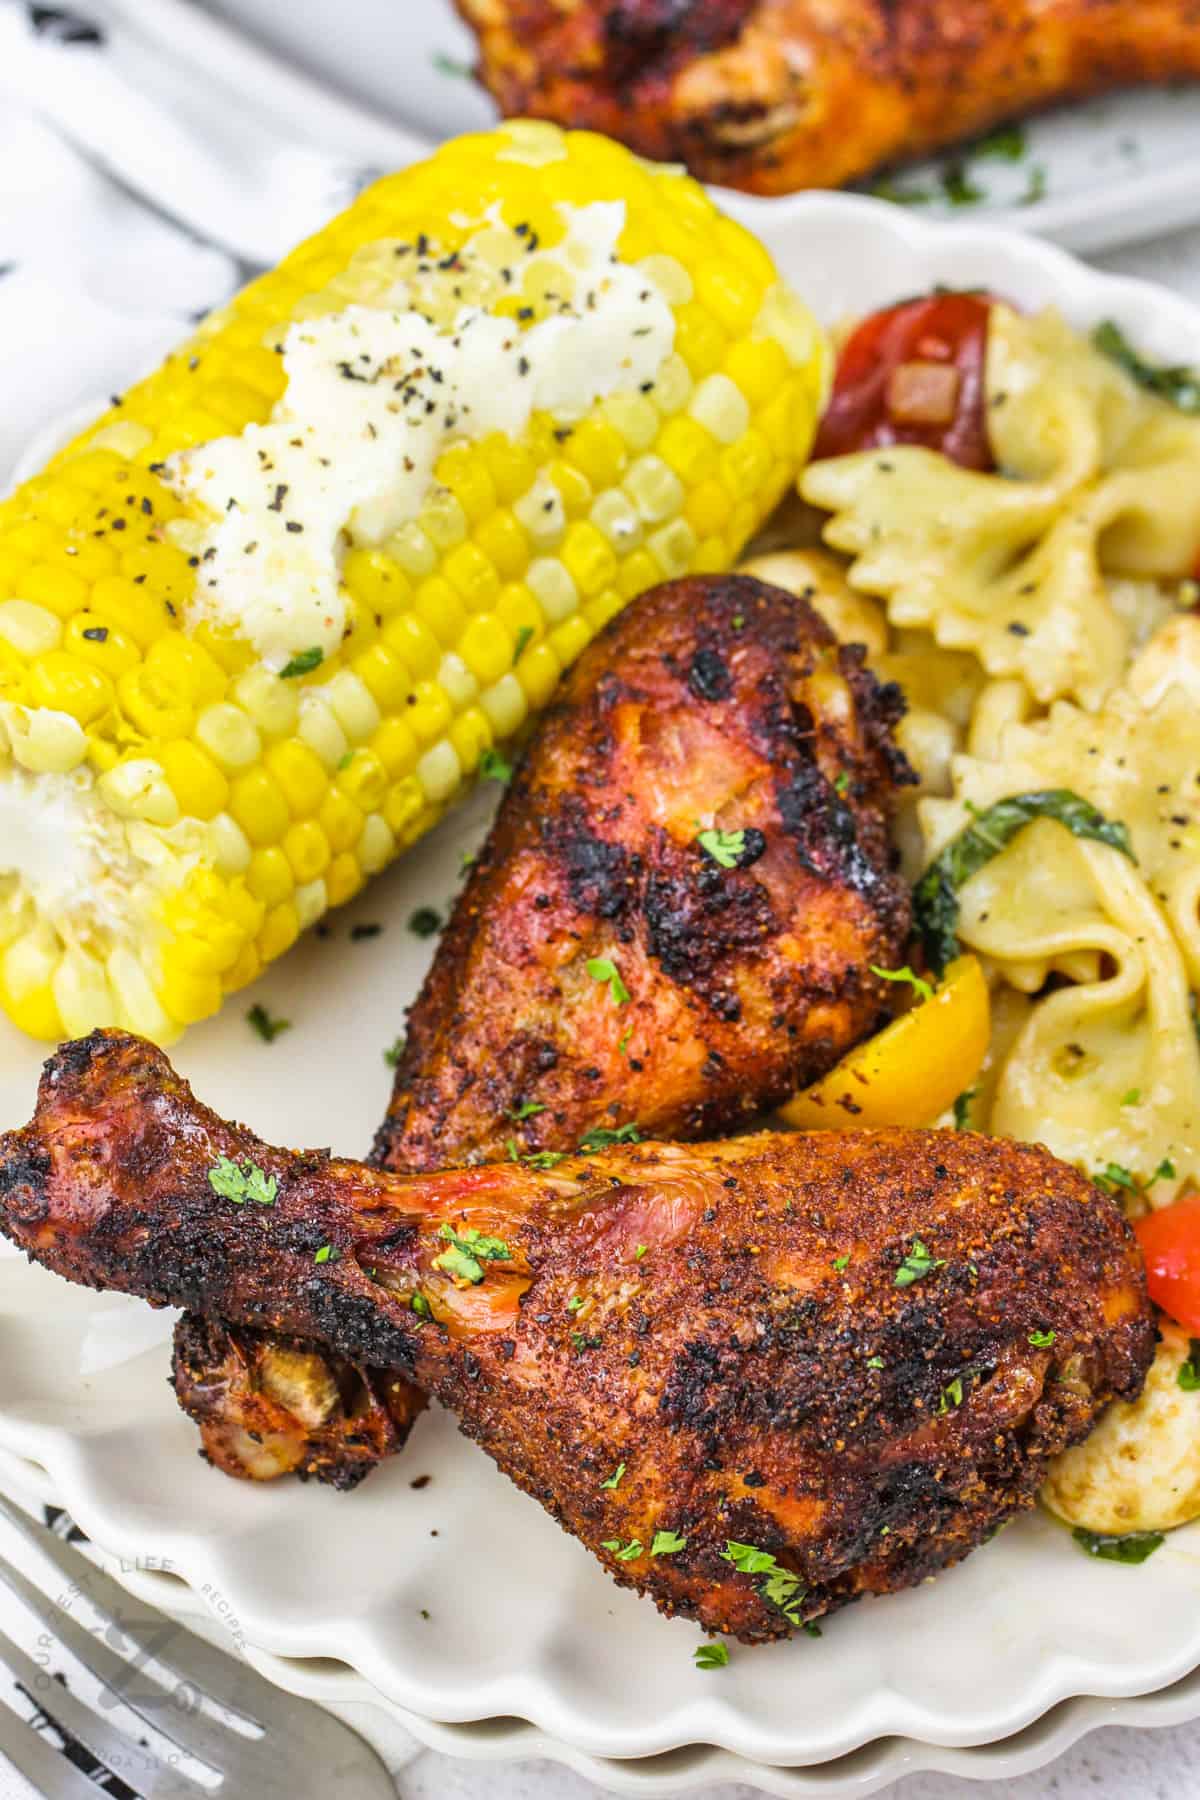 Smoked Chicken Drumsticks with pasta salad and corn